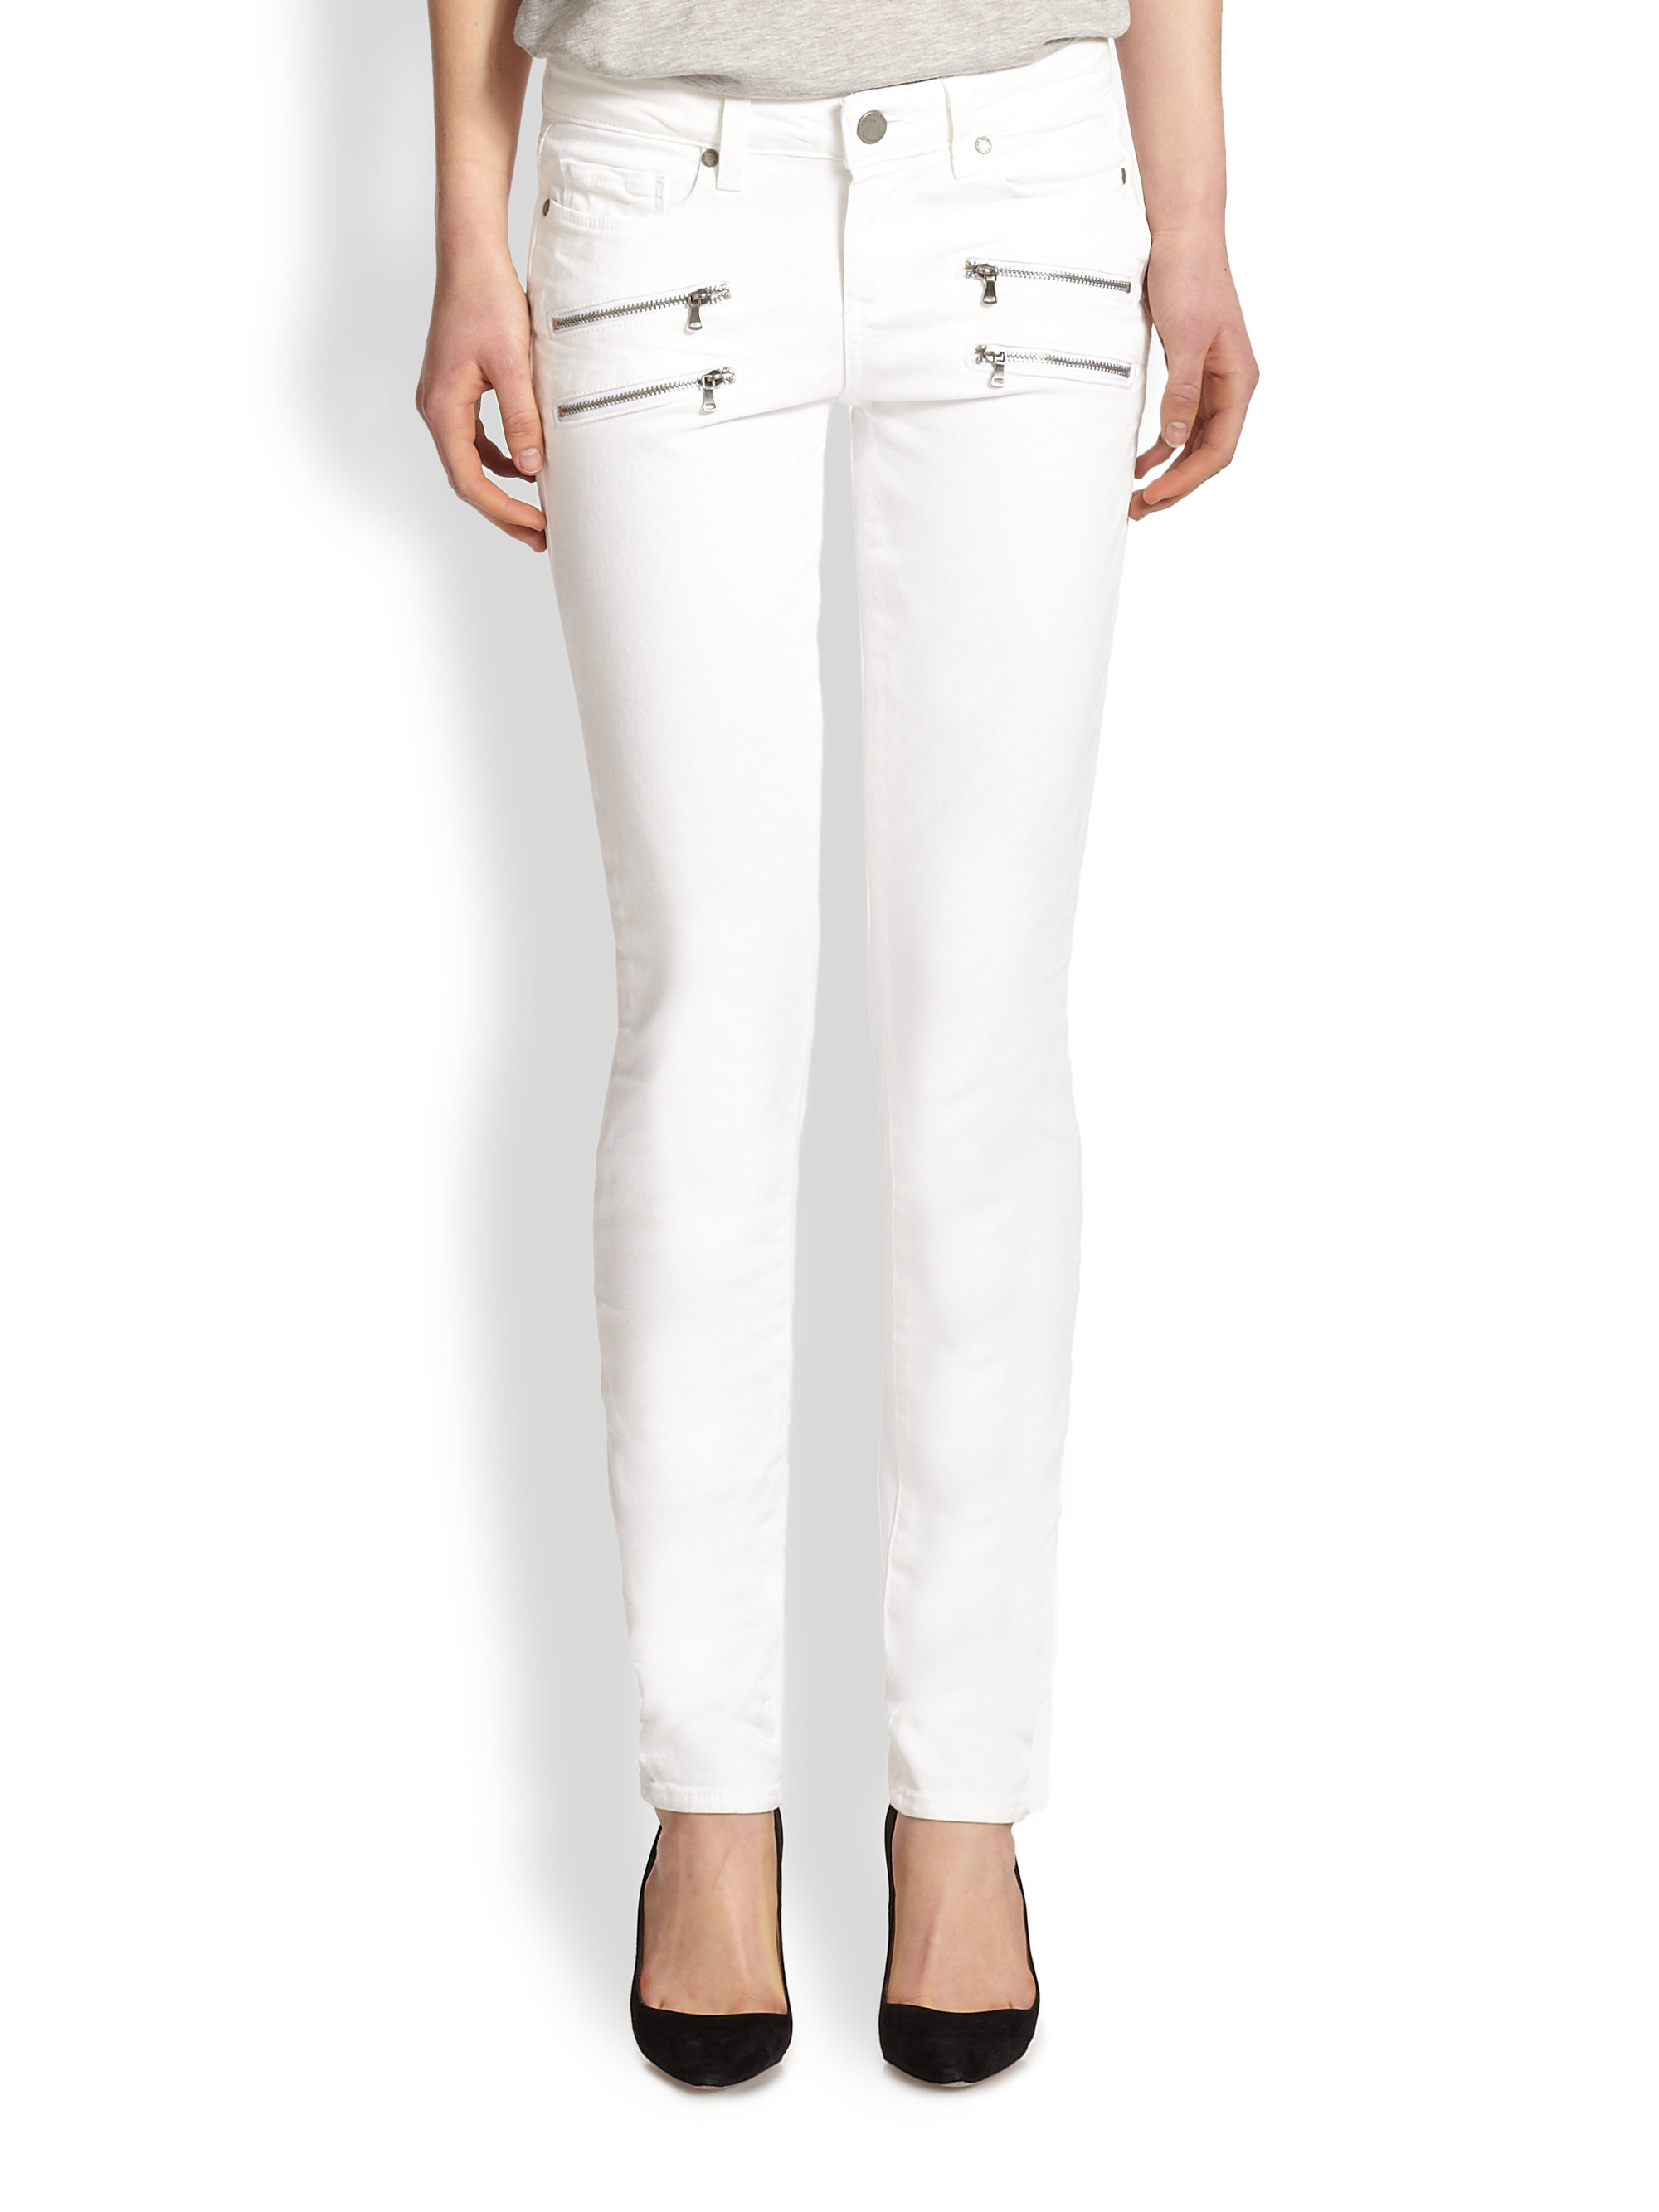 PAIGE Edgemont Ultra Skinny Jeans in White - Lyst